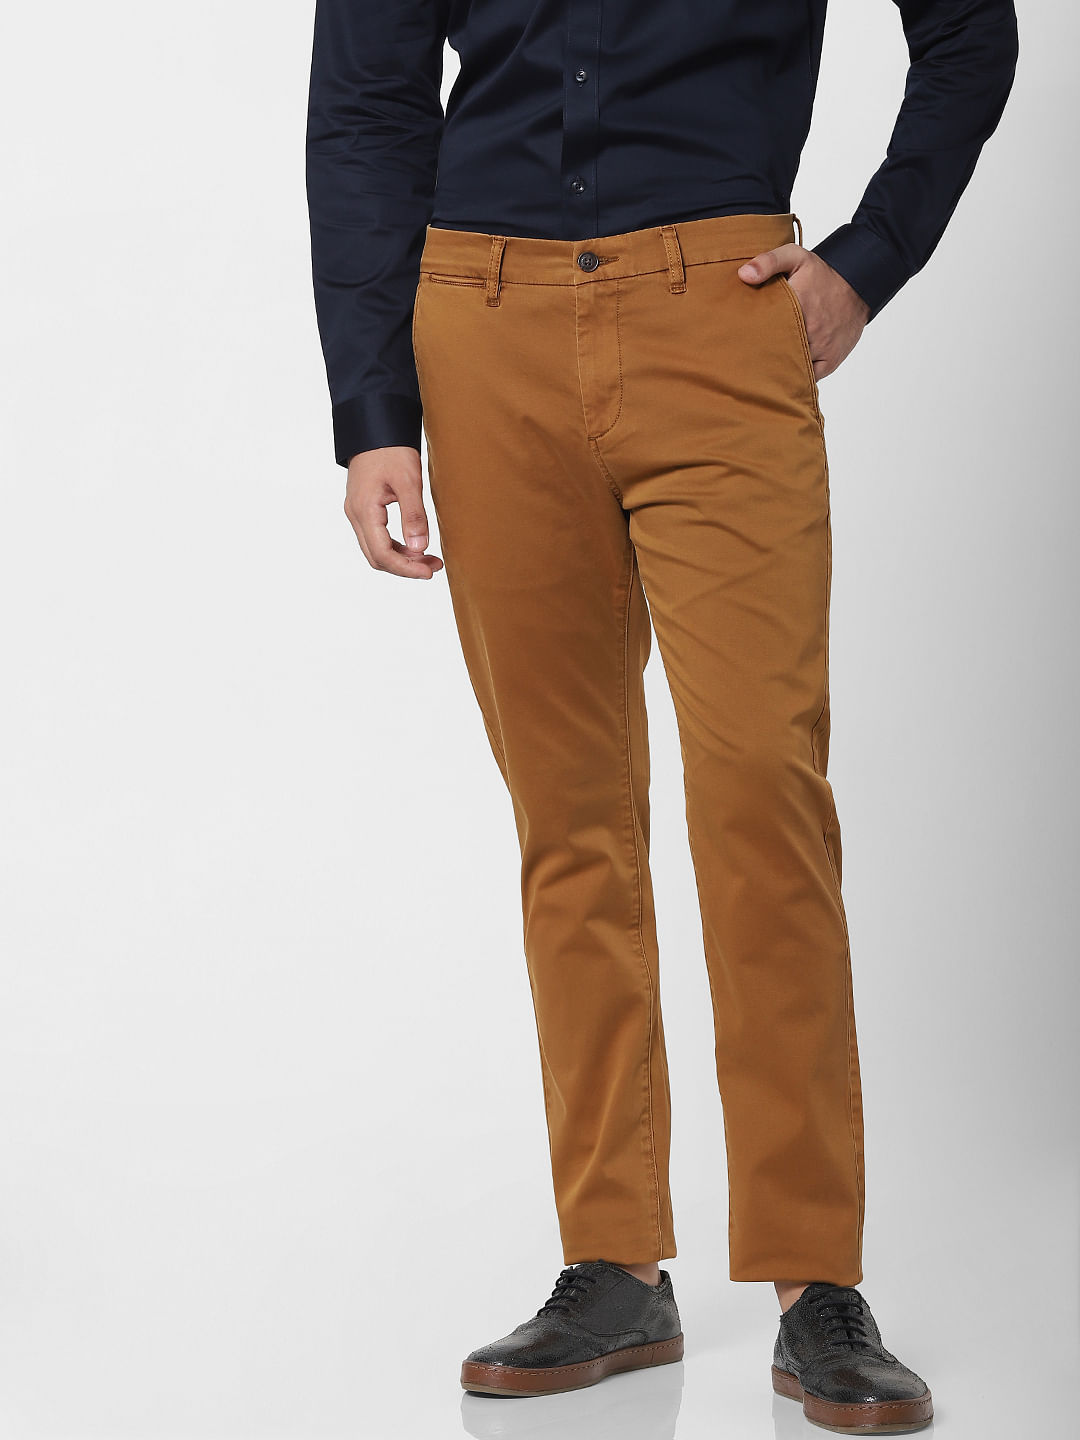 Jack  Jones Teal Mid Rise Suit Set Trousers Buy Jack  Jones Teal Mid  Rise Suit Set Trousers Online at Best Price in India  NykaaMan